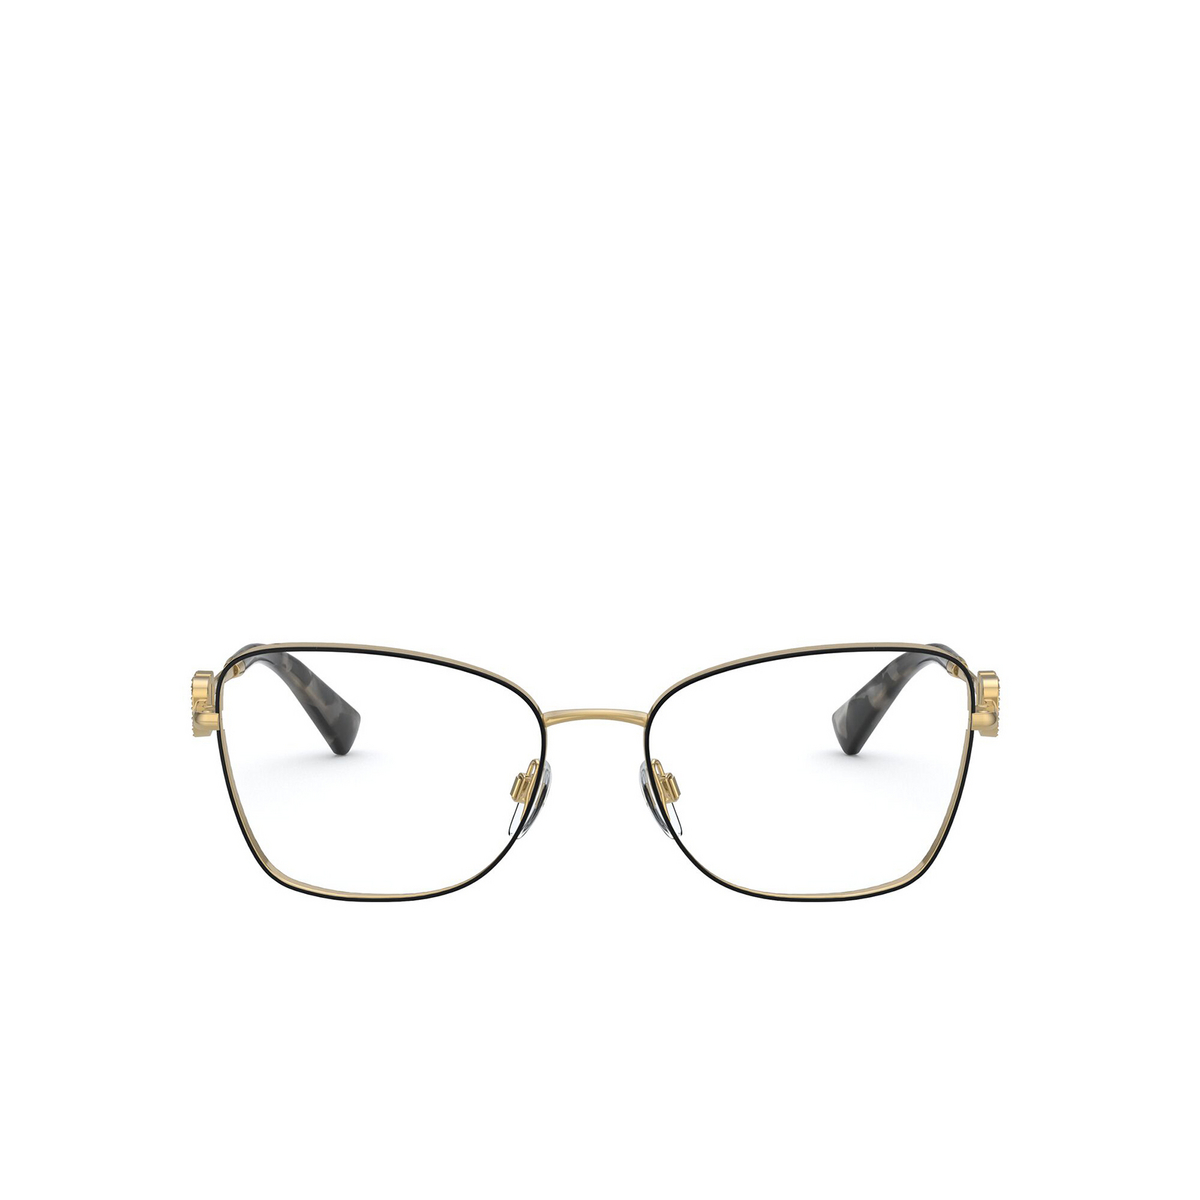 Valentino® Butterfly Eyeglasses: VA1019 color Gold 3002 - front view.